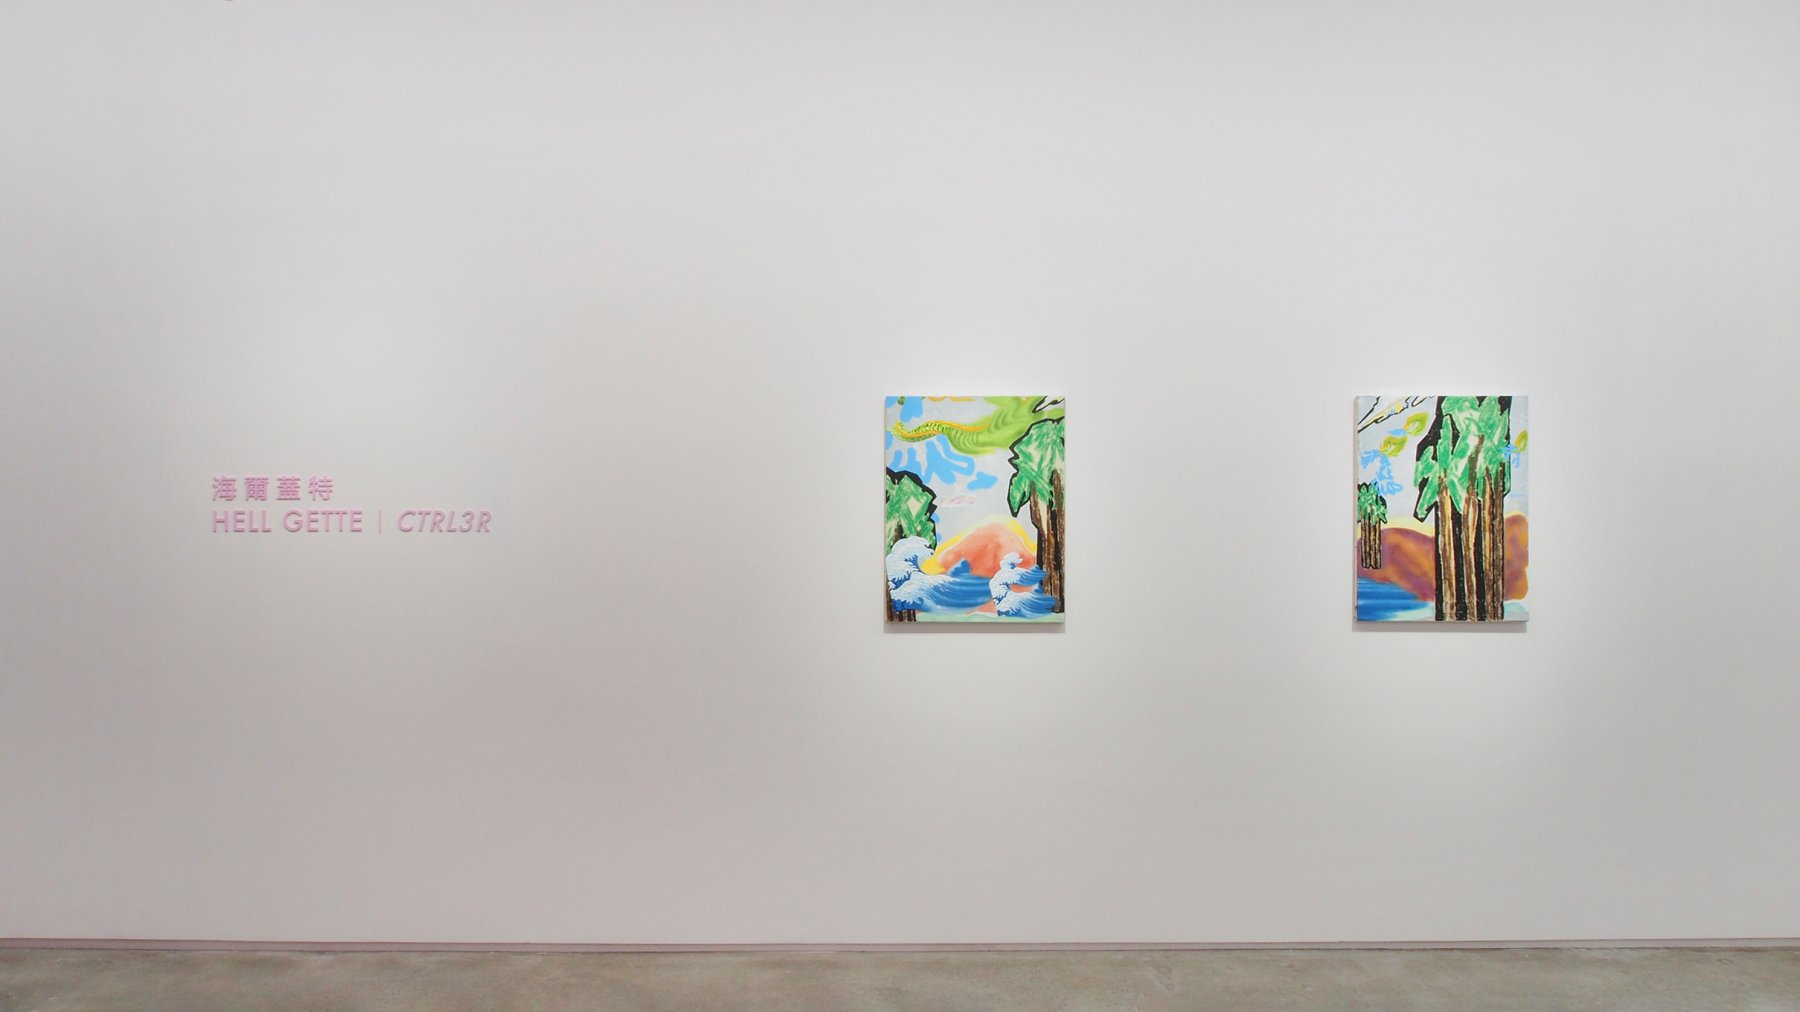 Installation image for Hell Gette: CTRL3R, at Each Modern